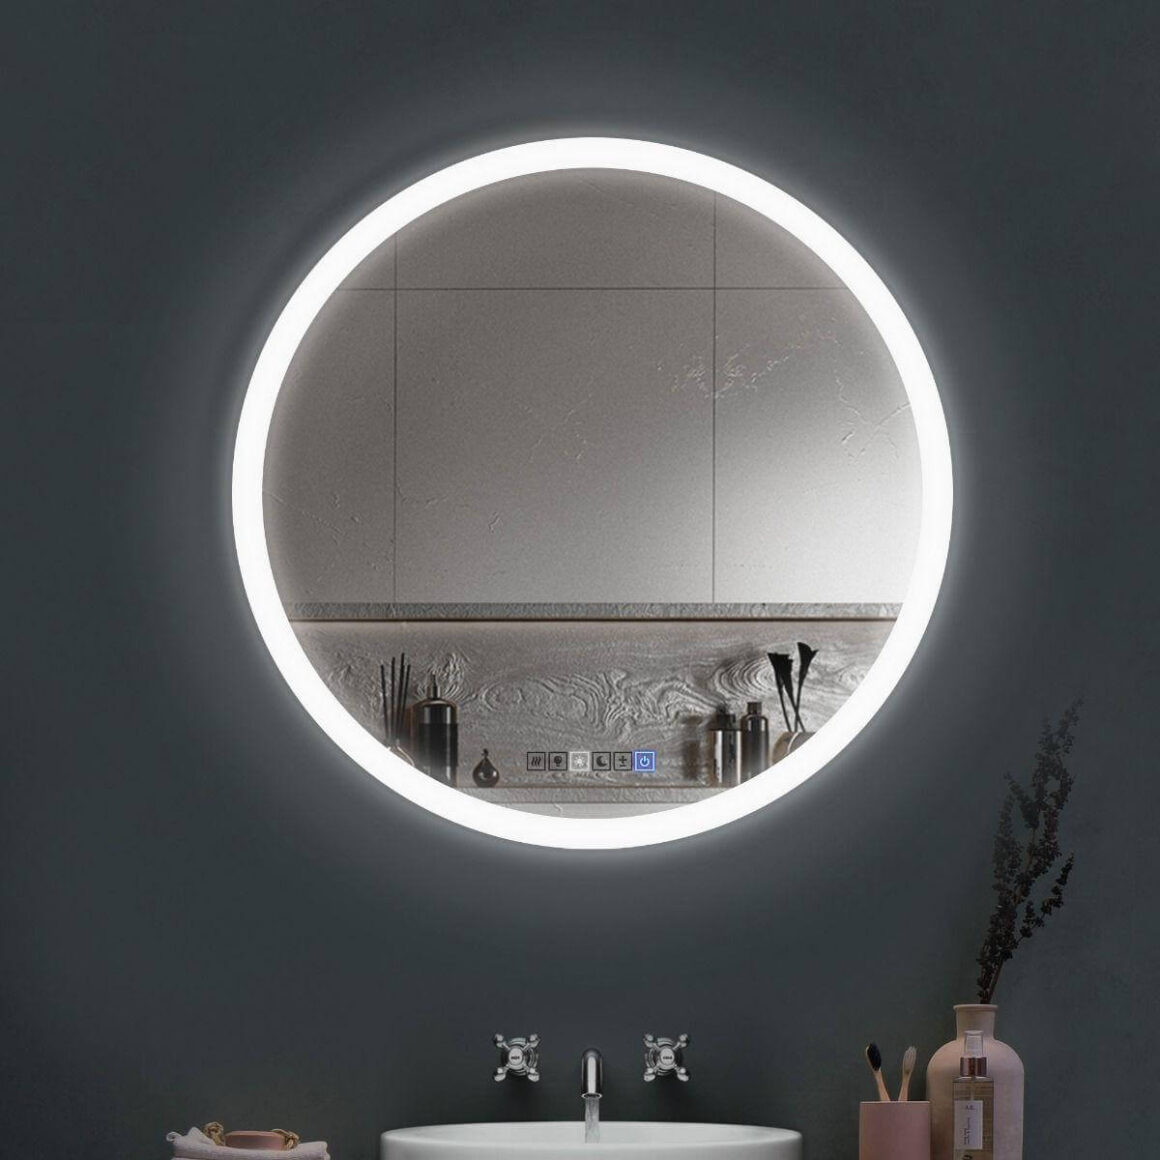 LED Mirror is Hanging Above a Bathroom Sink